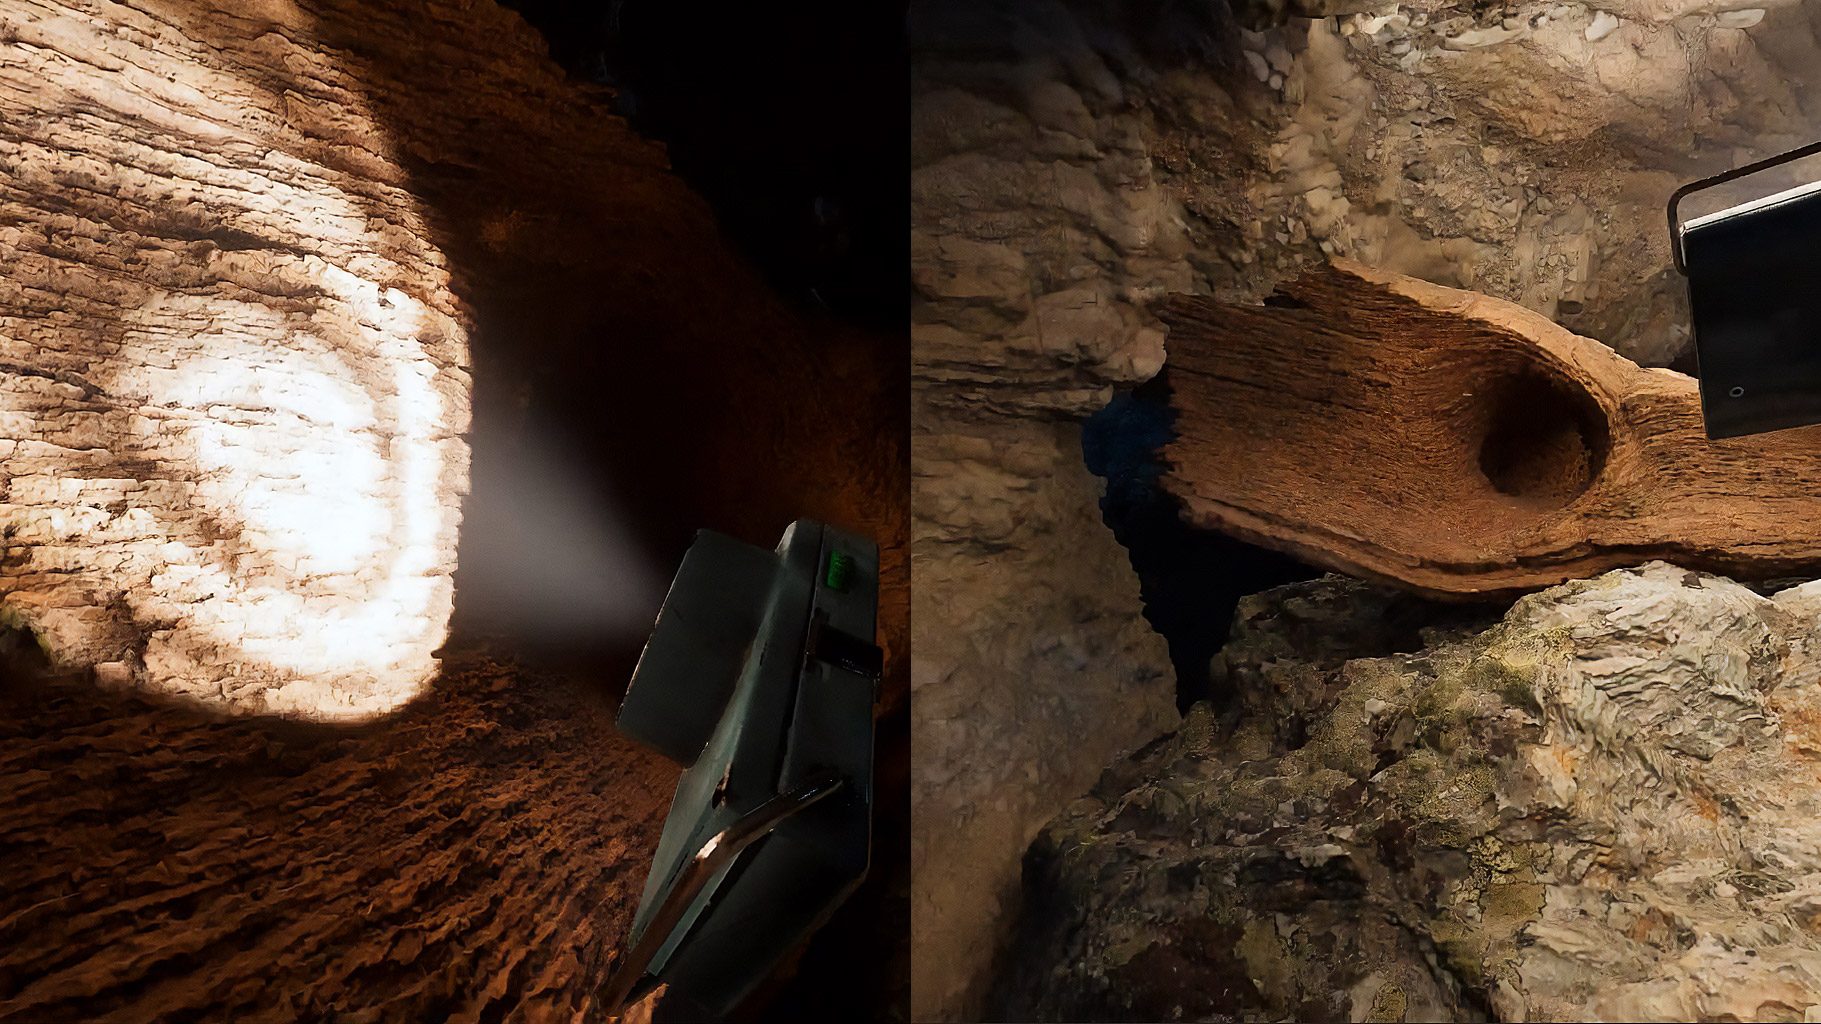 Unreal Engine 5’s New Rendering Tech is Beginning to Make VR Look Startlingly Real